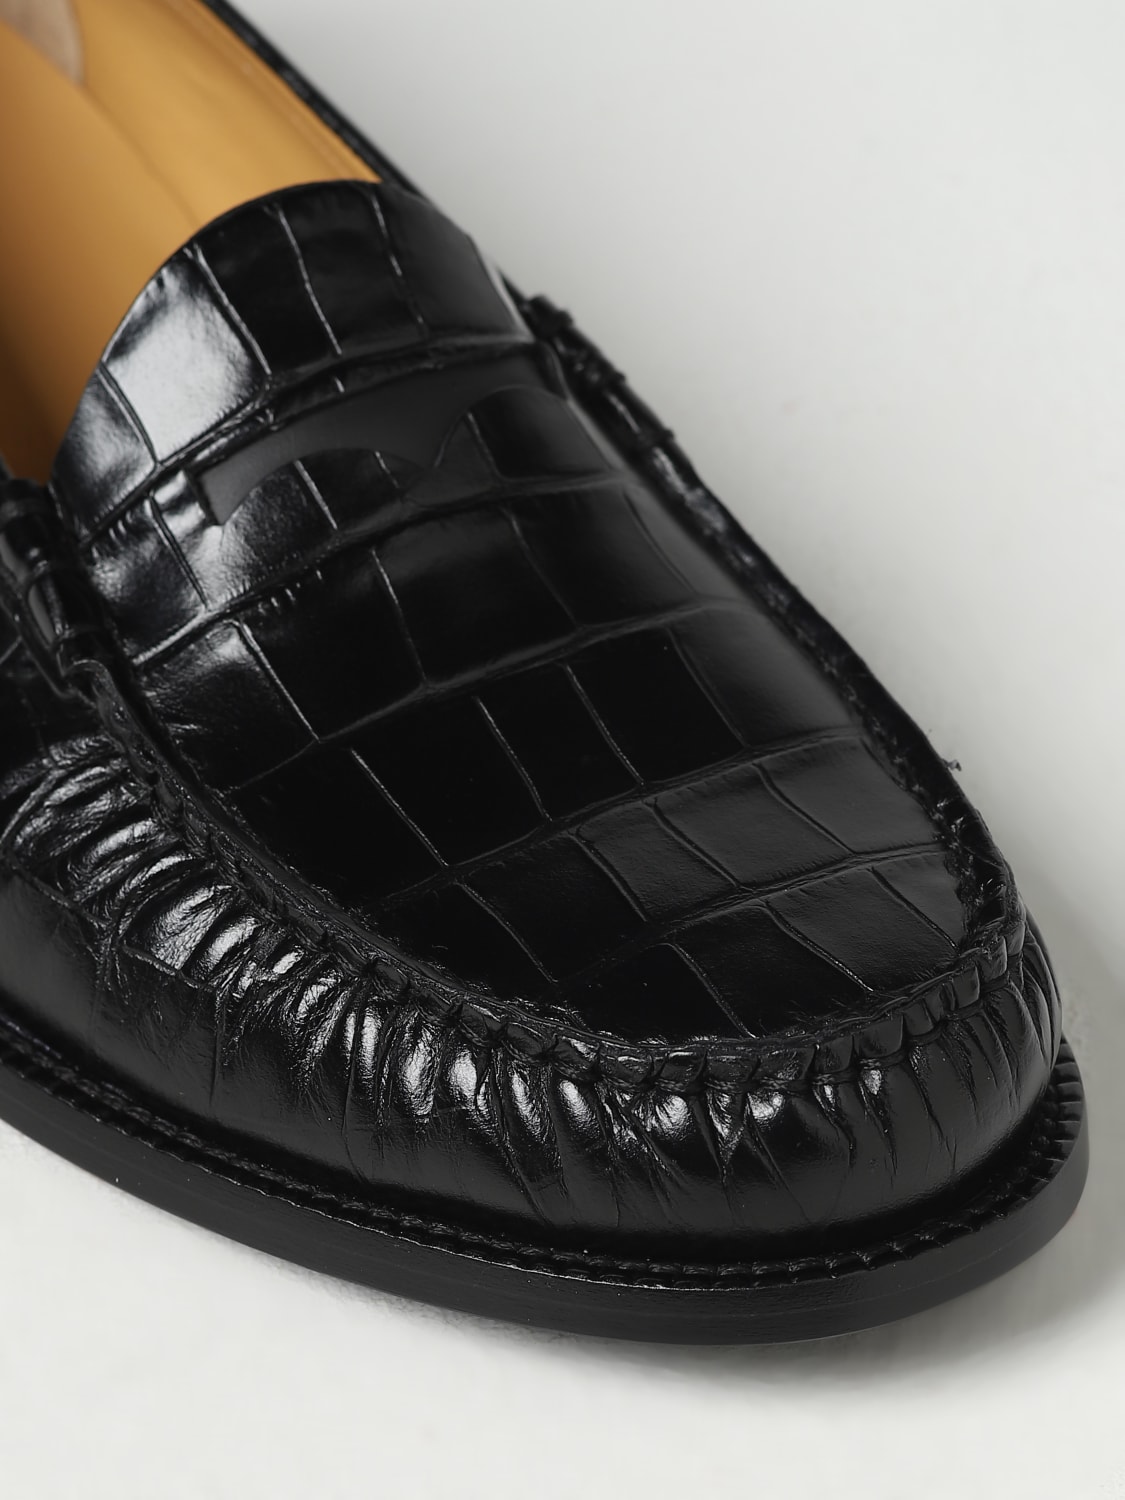 Bally moccasins in croco print leather